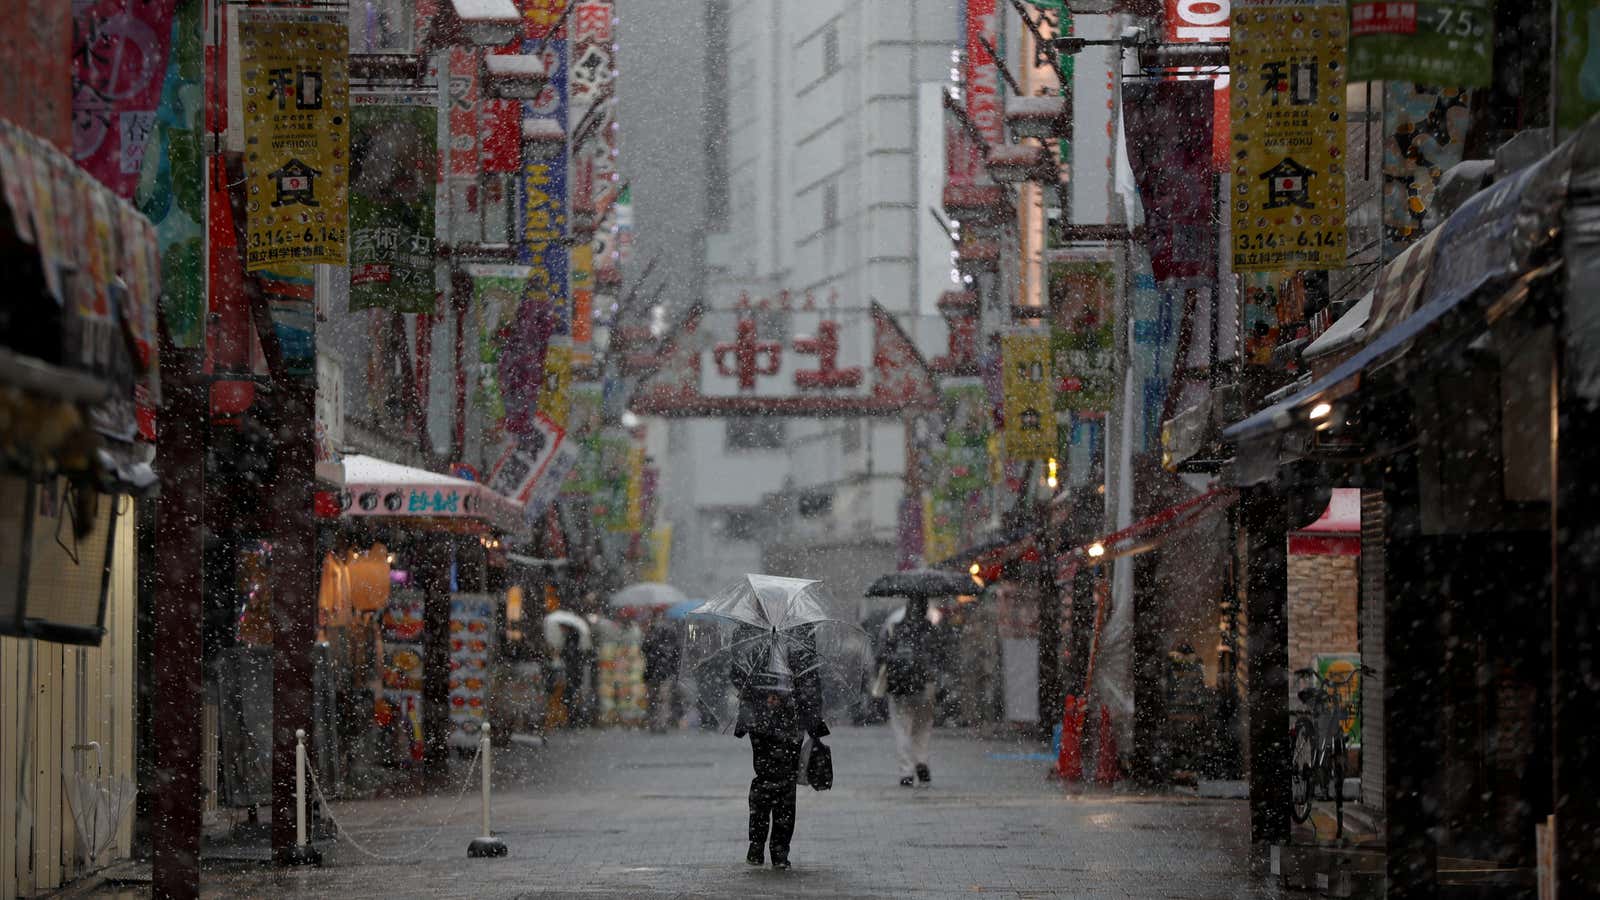 A cold snap in Japan revealed a flaw in how Asian countries plan to address climate change.